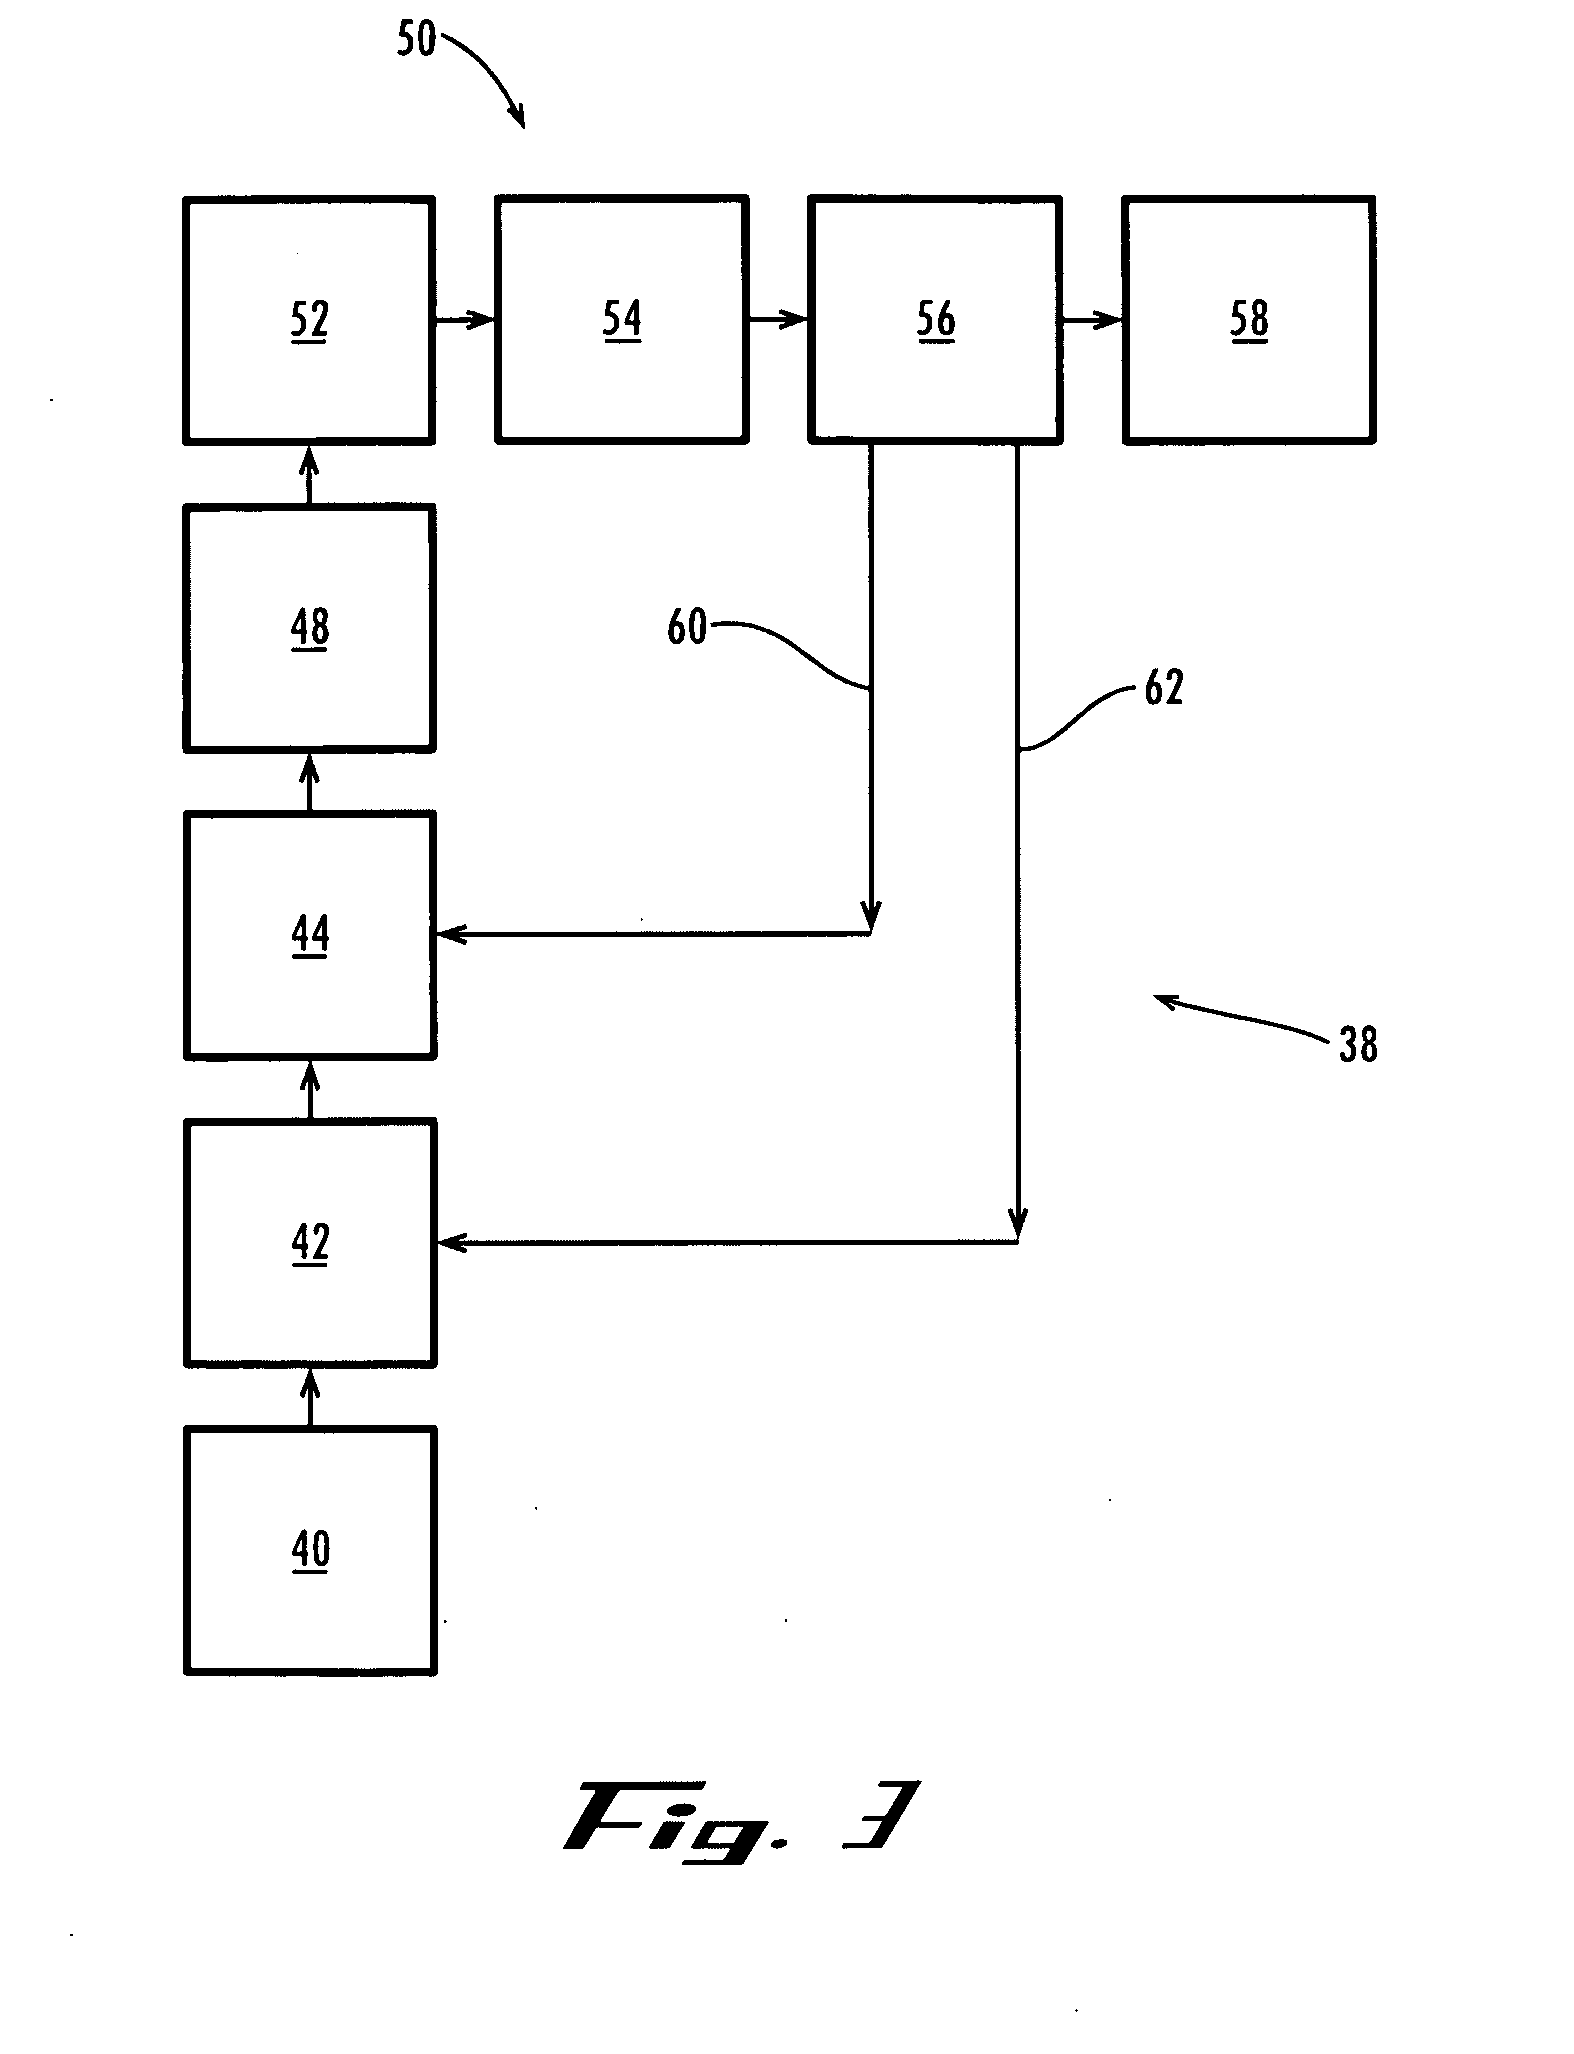 Reusable Container and Method for Retorting Flexible Packages Containing Foodstuff